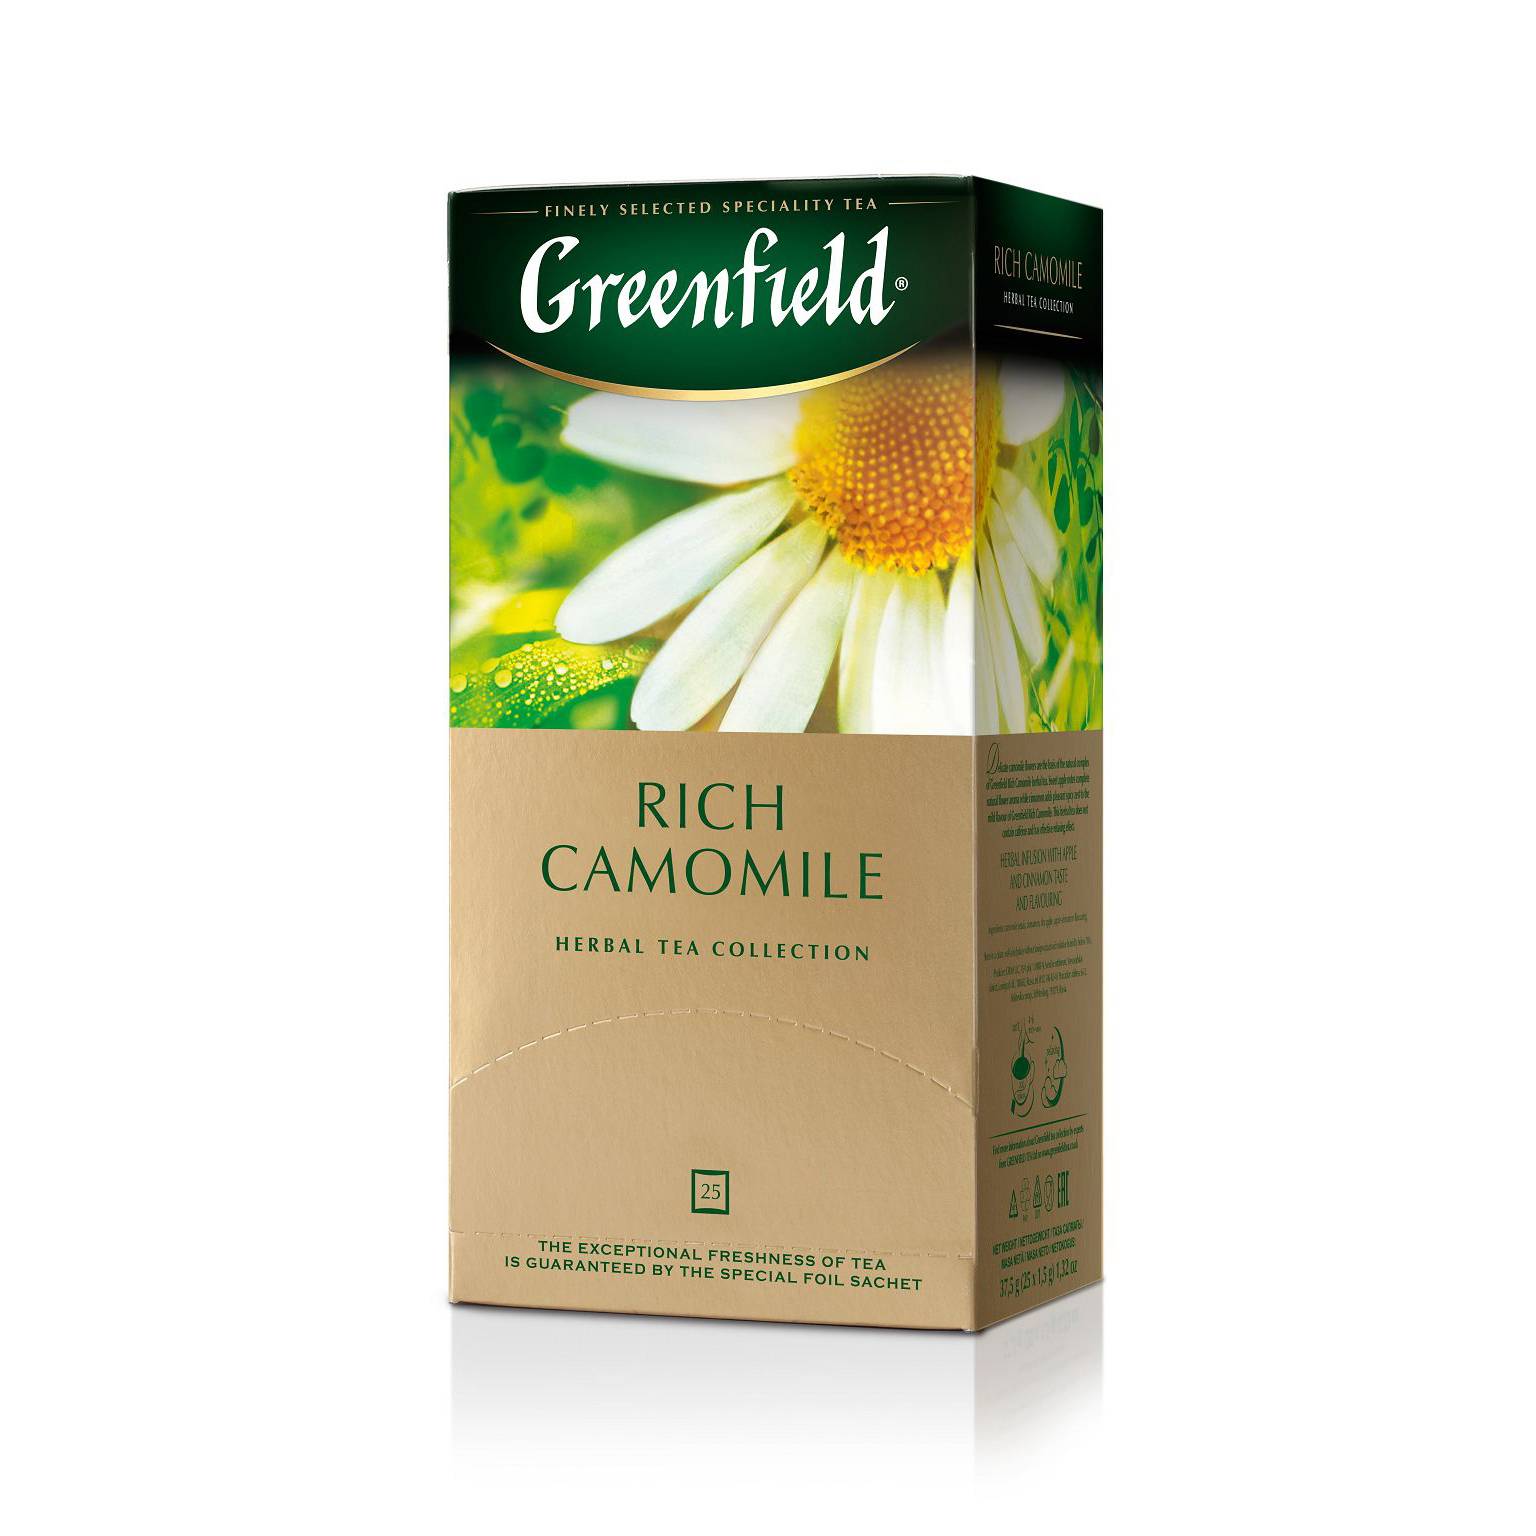 Greenfield Rich Camomile pac image